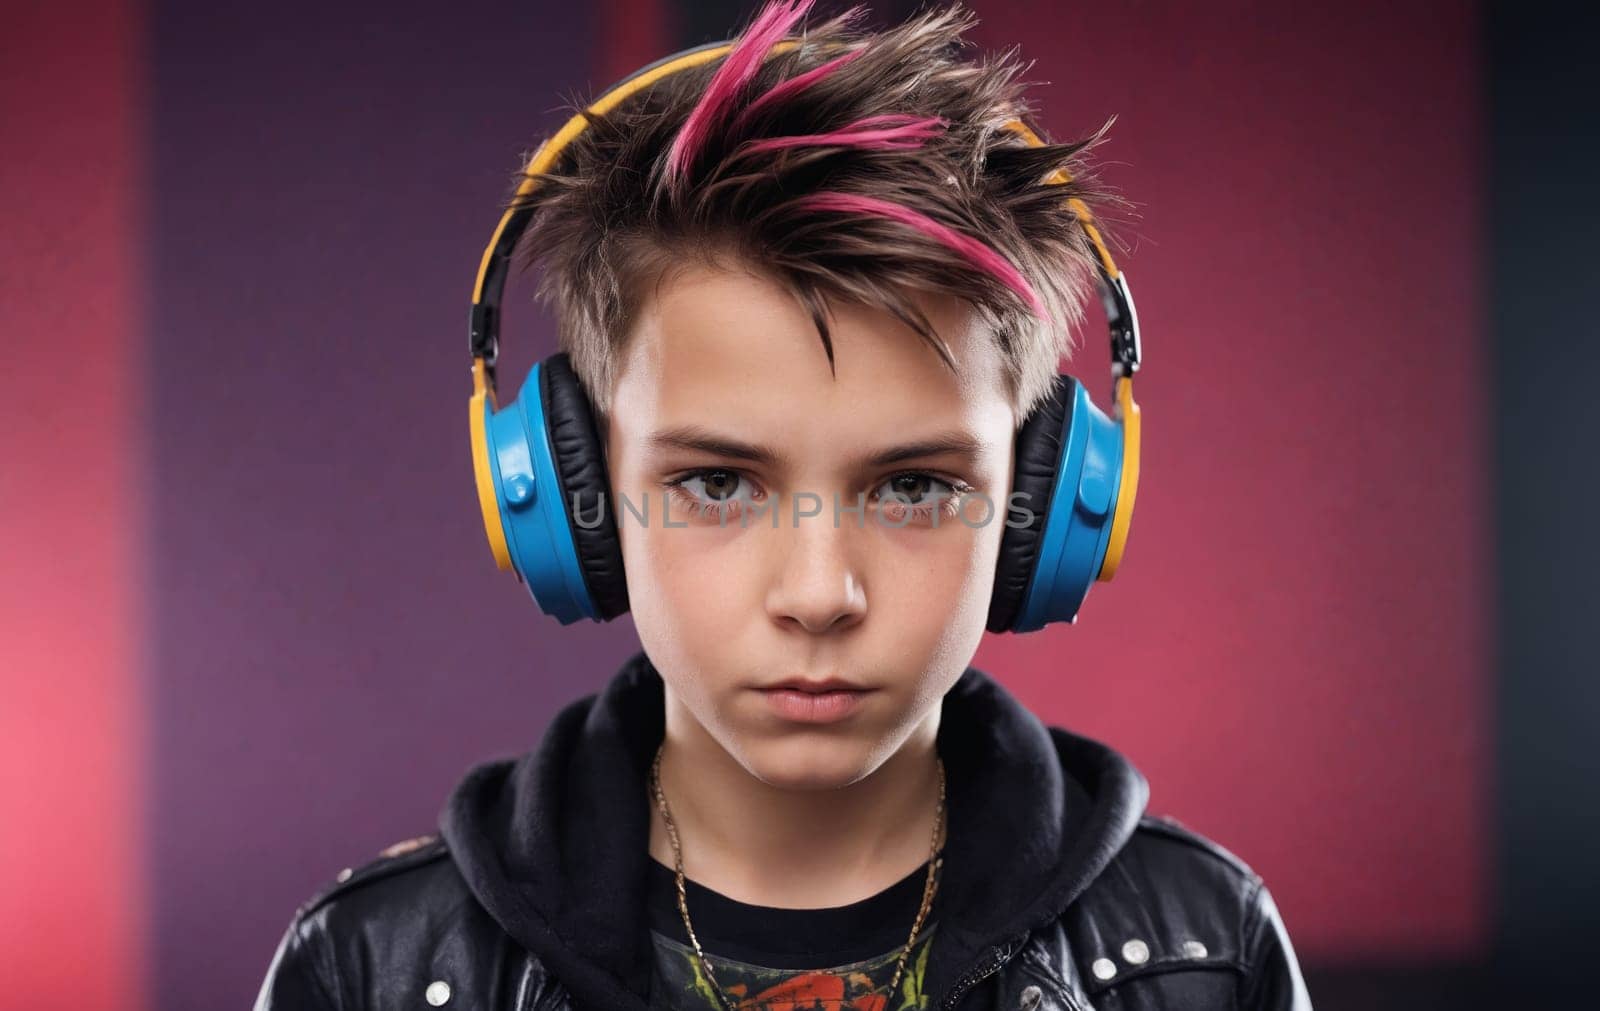 Young boy in leather jacket wearing headphones, listening to music artist by Andre1ns